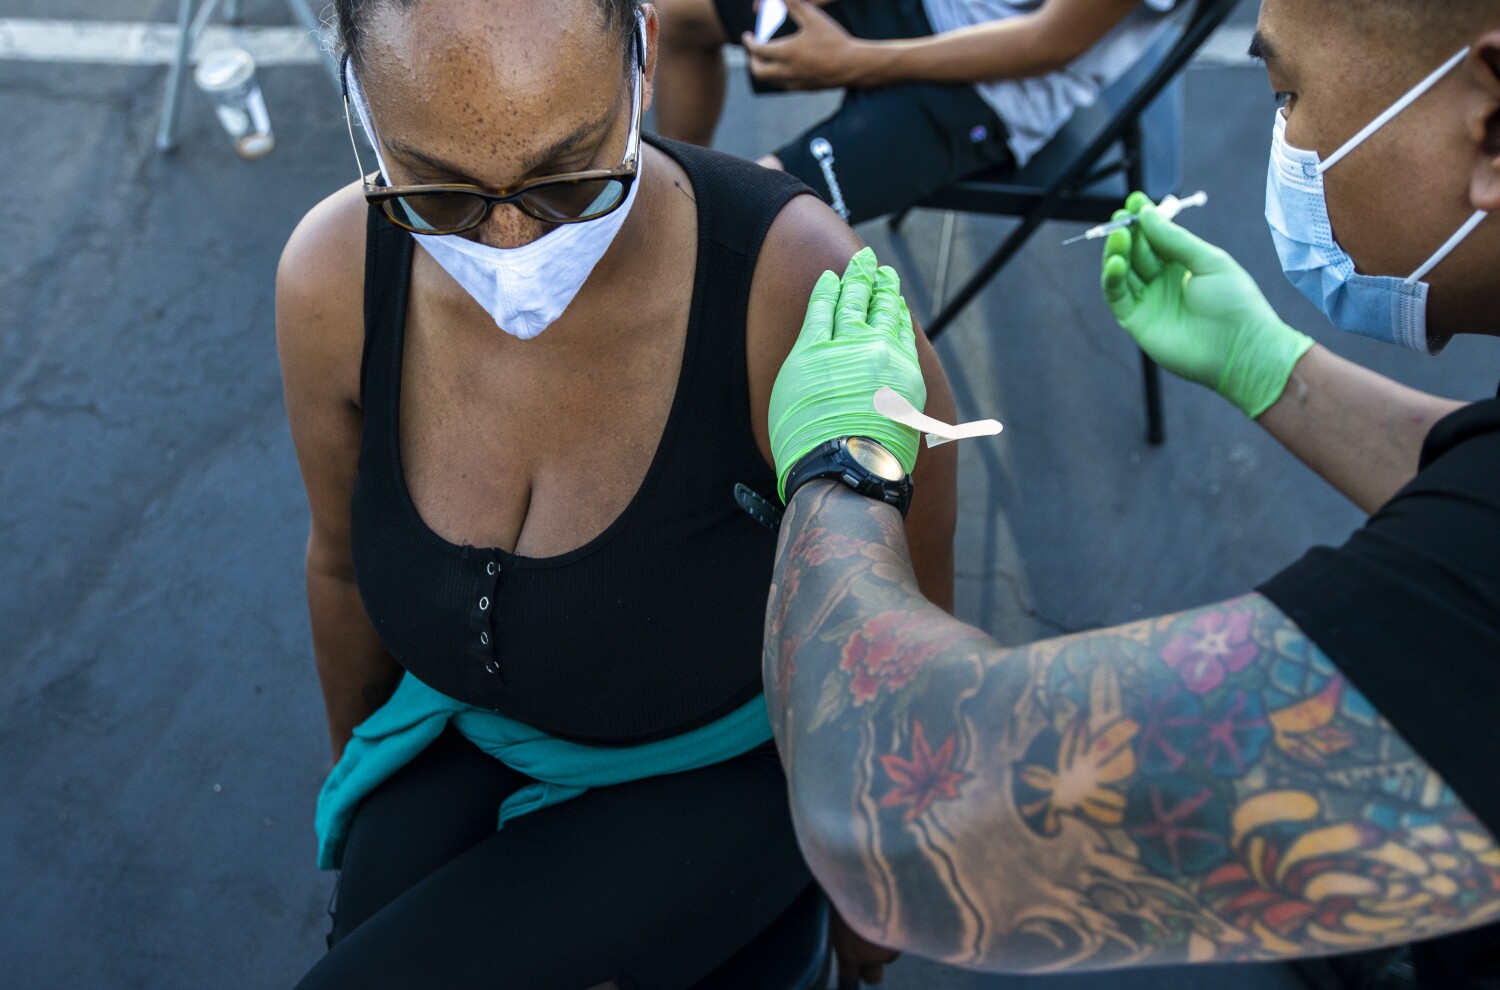 COVID-19 cases surge in L.A. County, fueled by 'enormously selfish' unvaccinated